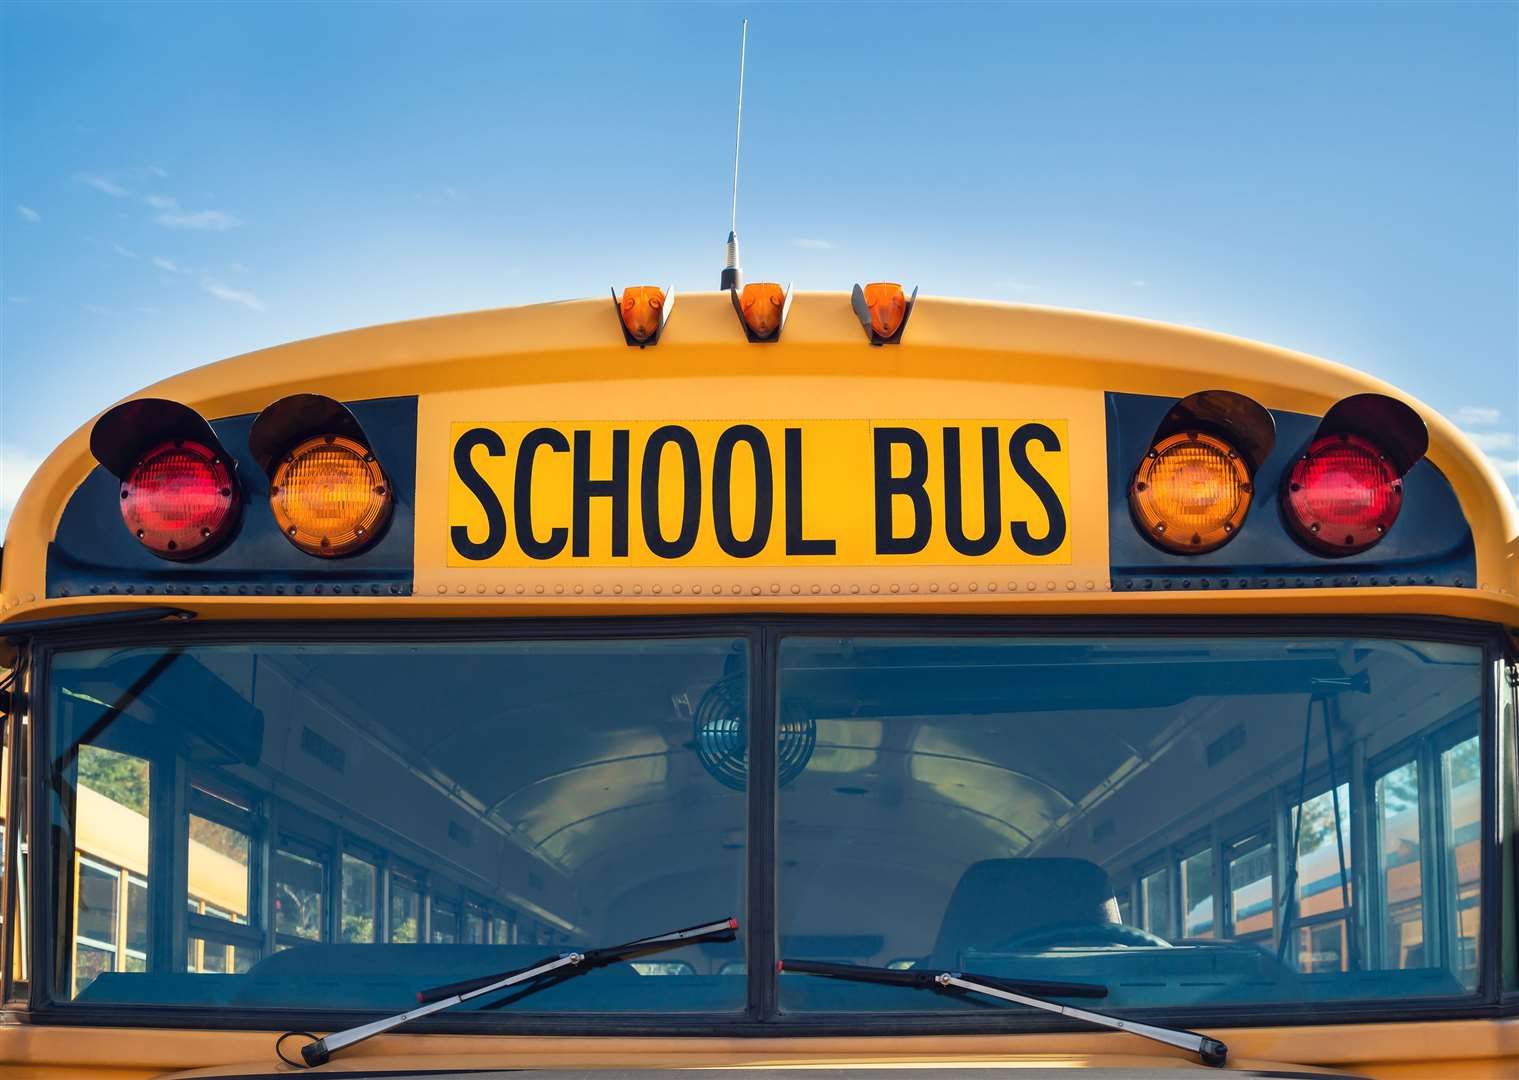 Pupils will not be asked to wear face coverings or adhere to social-distancing advice on dedicated school buses. AdobeStock Images.